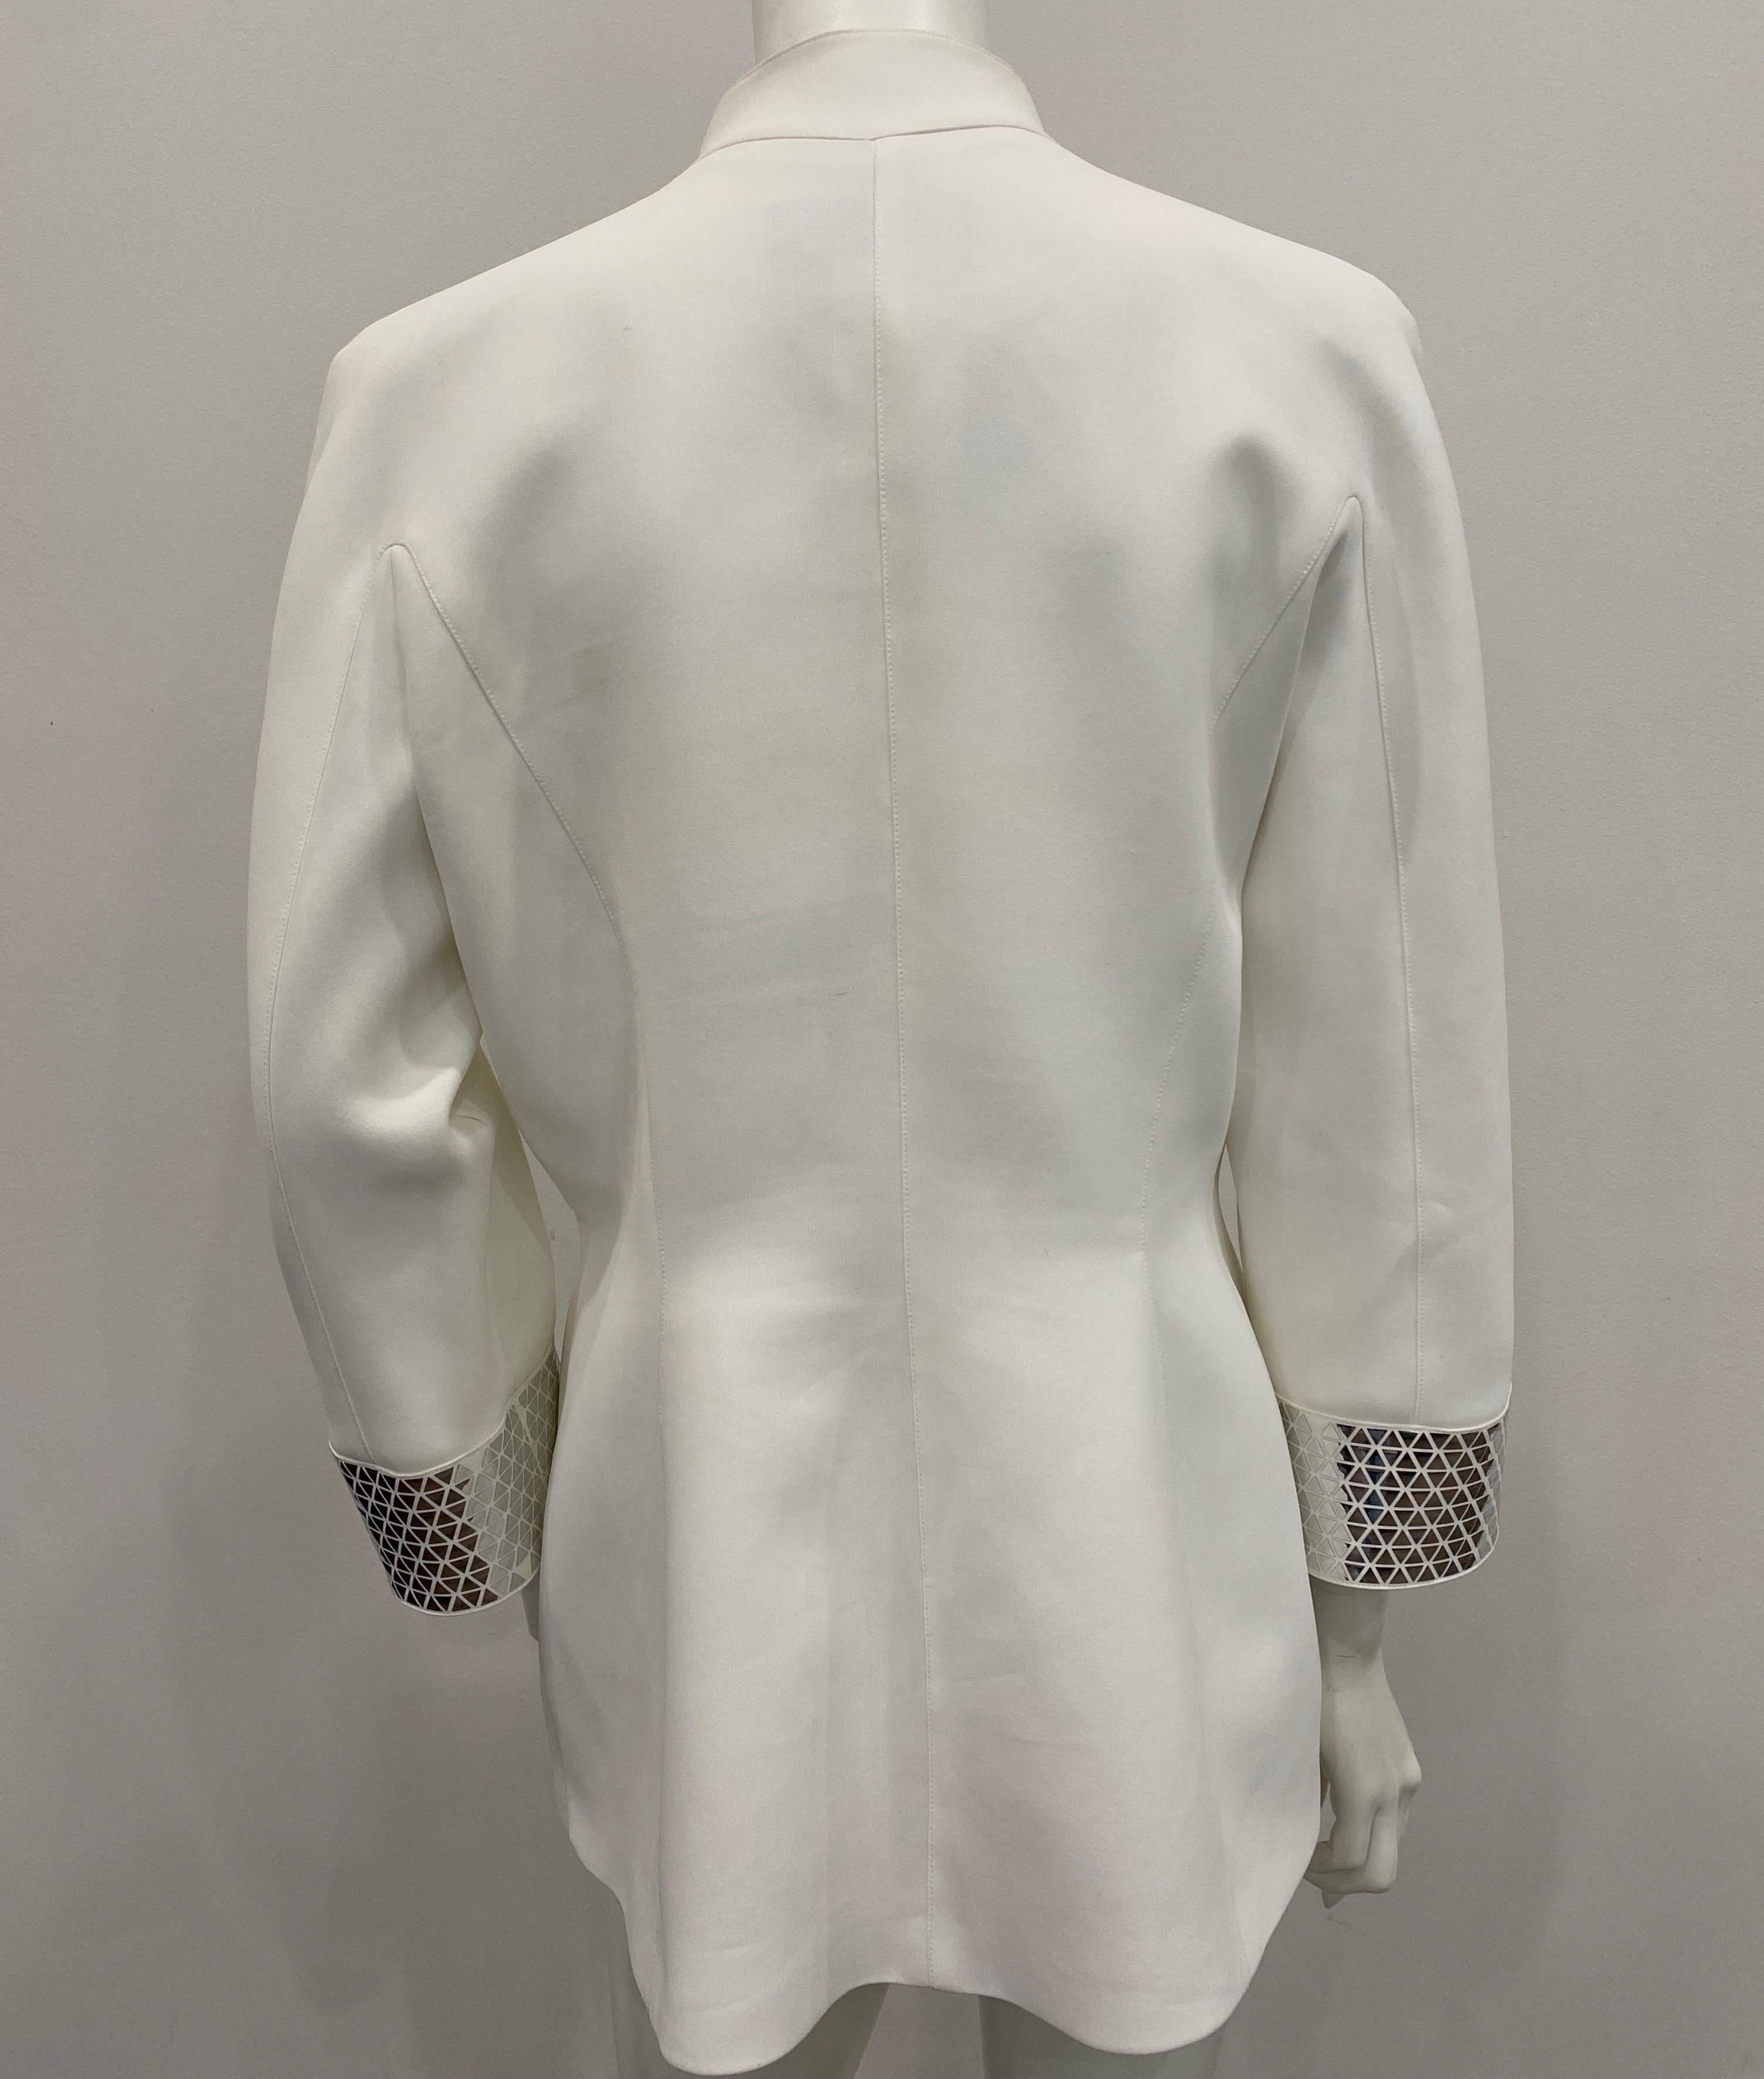 Thierry Mugler Couture 1990s White Jacket with Silver metallic details - Size 46 For Sale 5